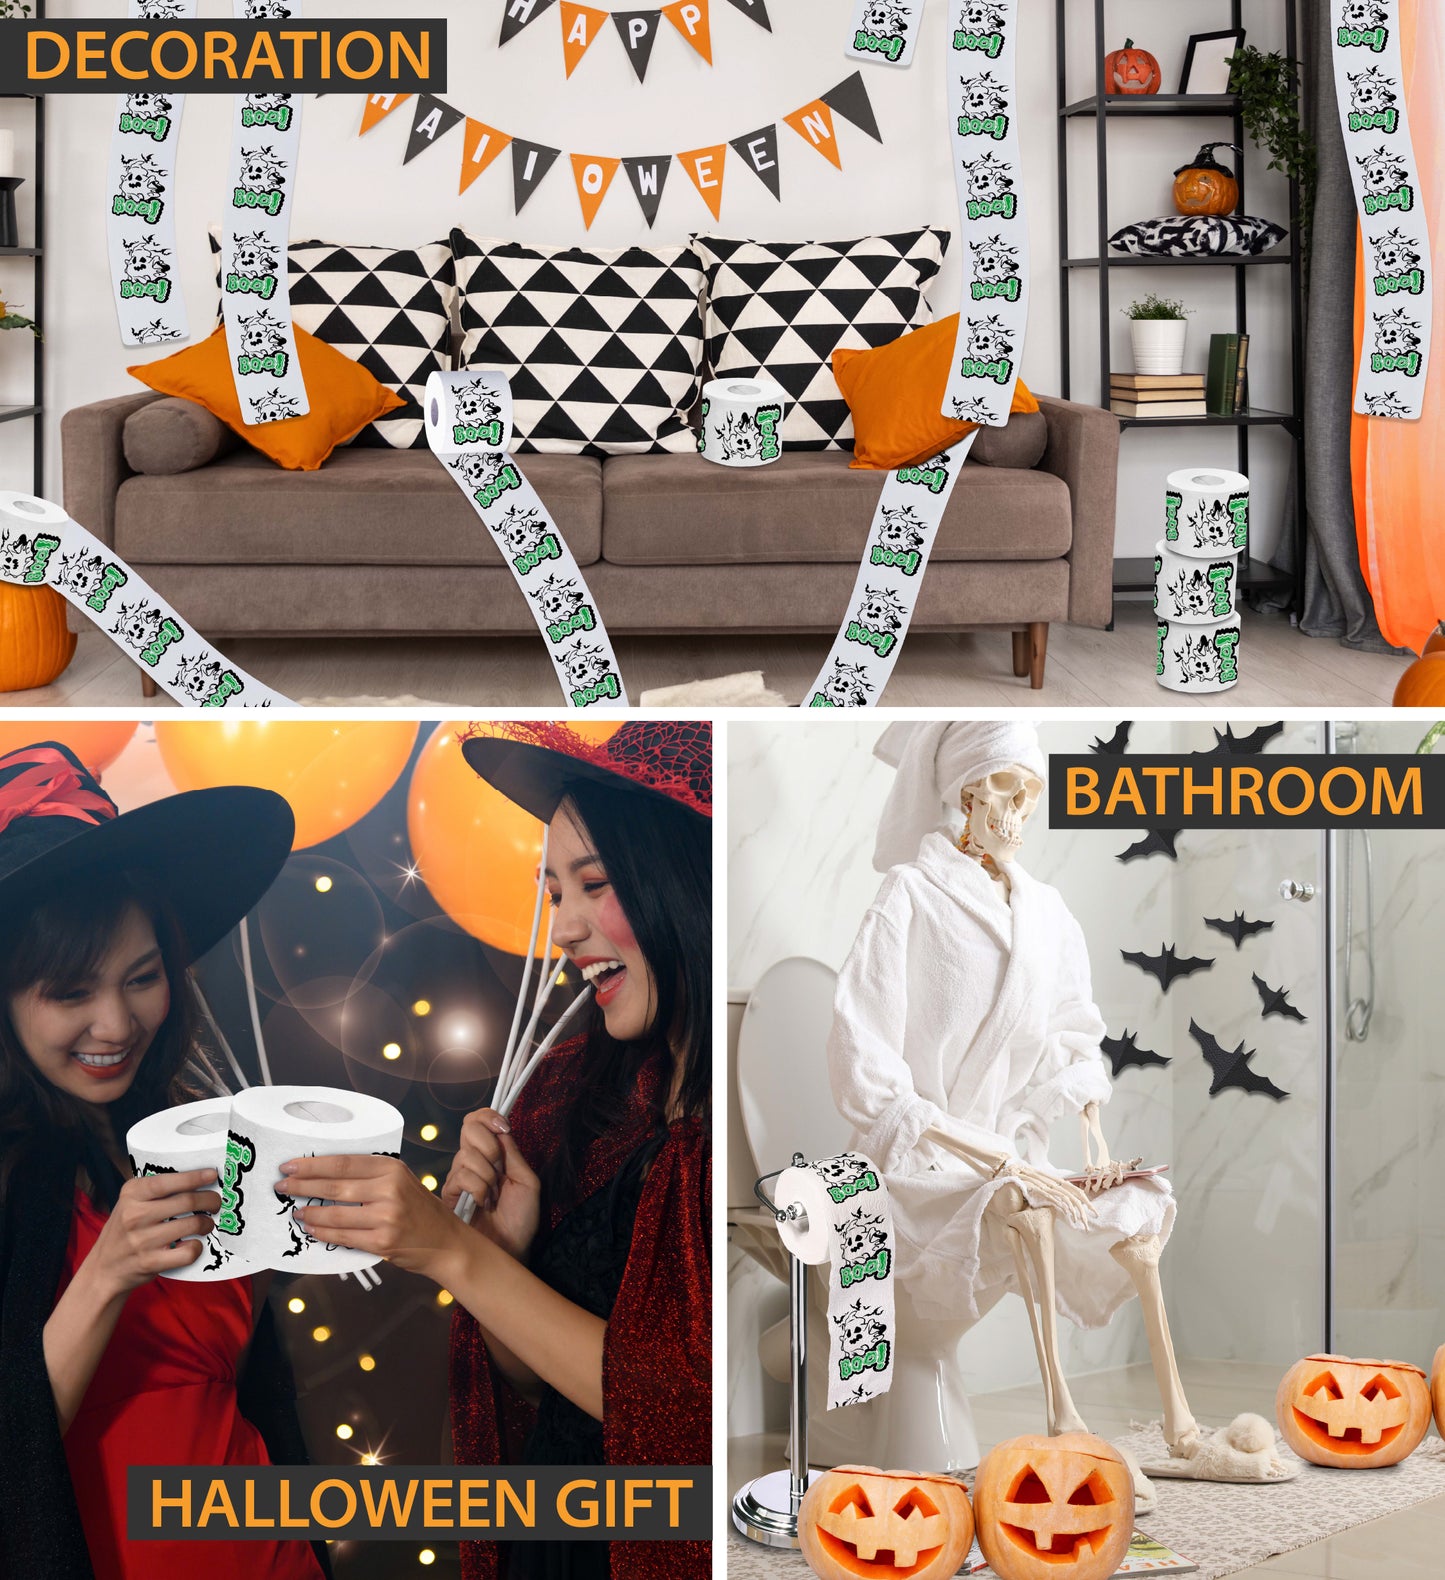 Printed TP Halloween Boo! Ghost Printed Toilet Paper Gag Gift – 500 Sheets